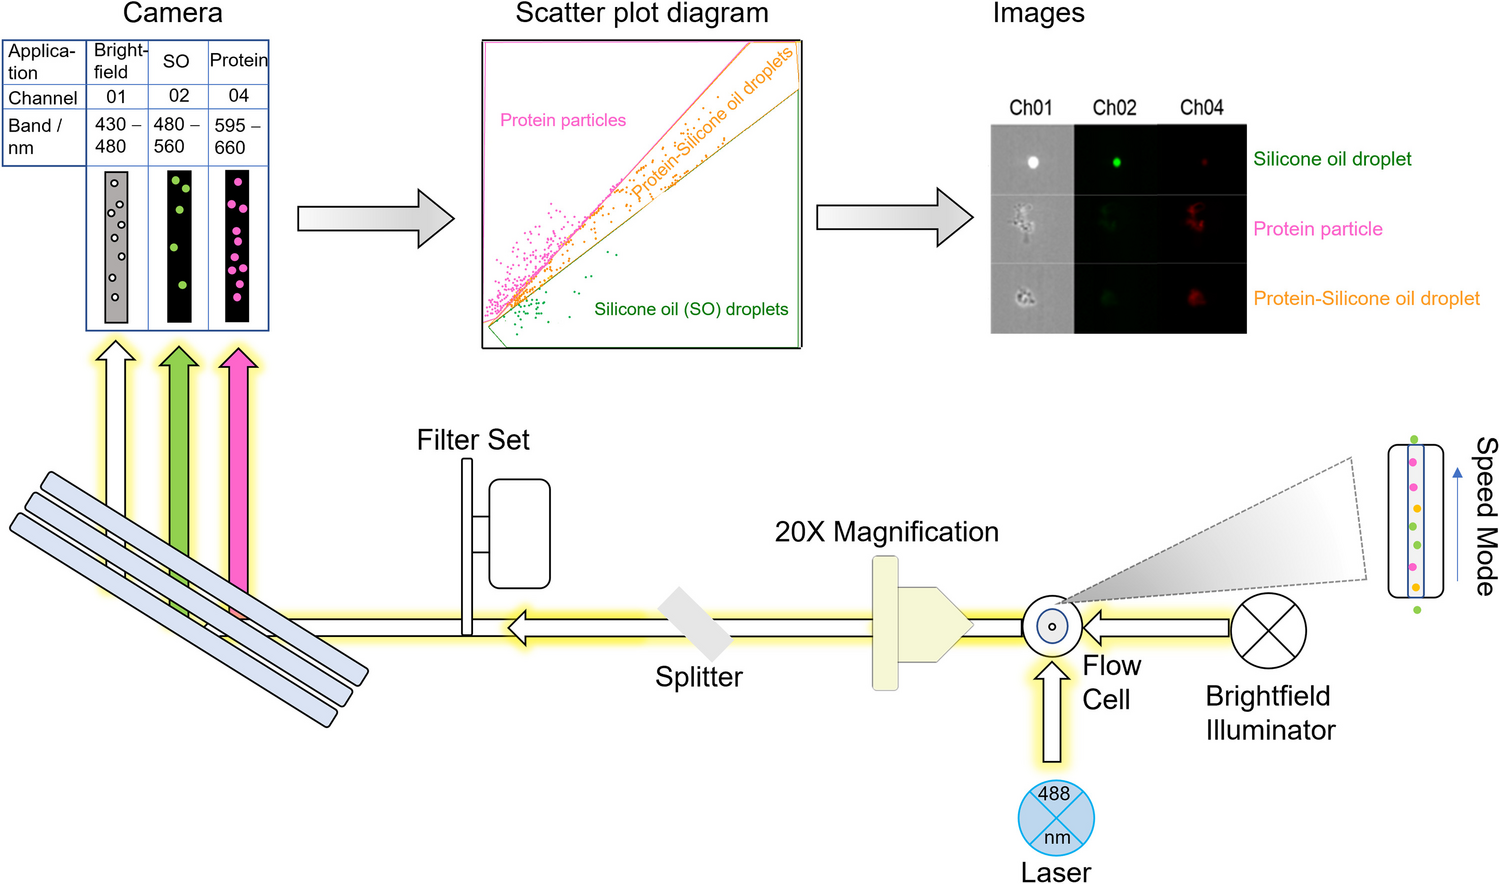 Assessment of Imaging Flow Cytometry for the Simultaneous Discrimination of Protein Particles and Silicone Oil Droplets in Biologicals